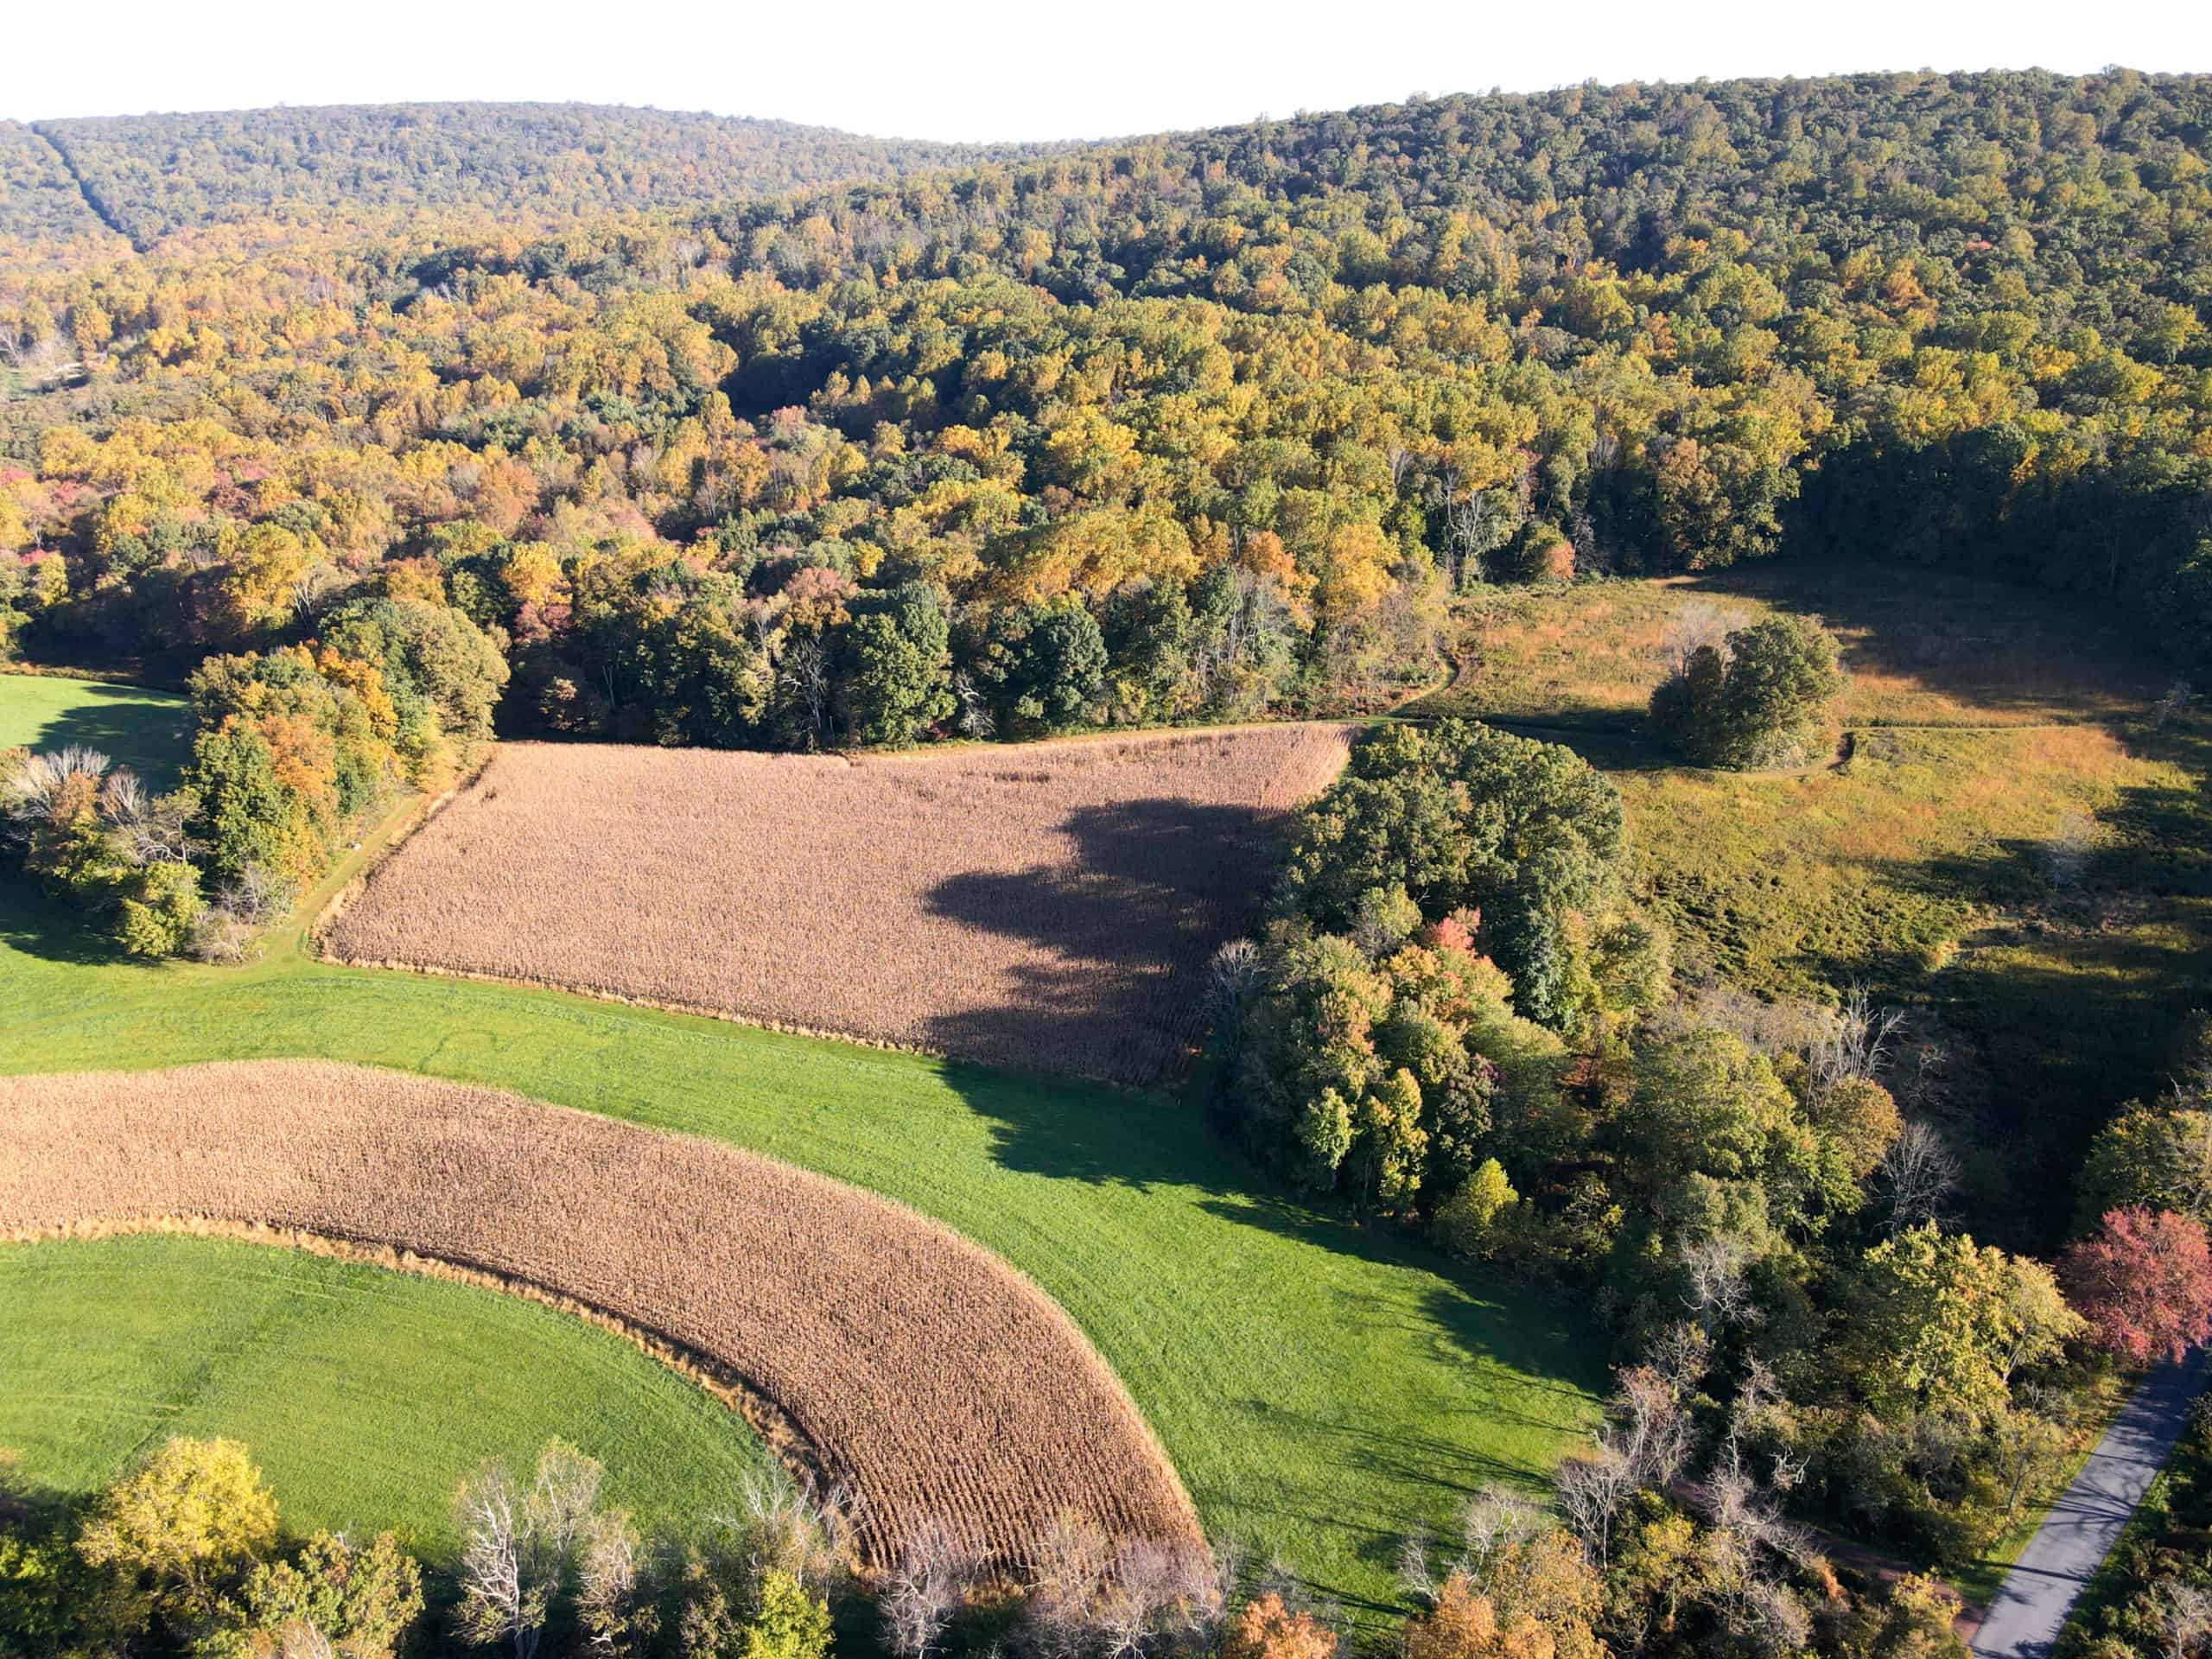 Drone photo of farm fields with forested ridges in background showing only a little bit of fall color